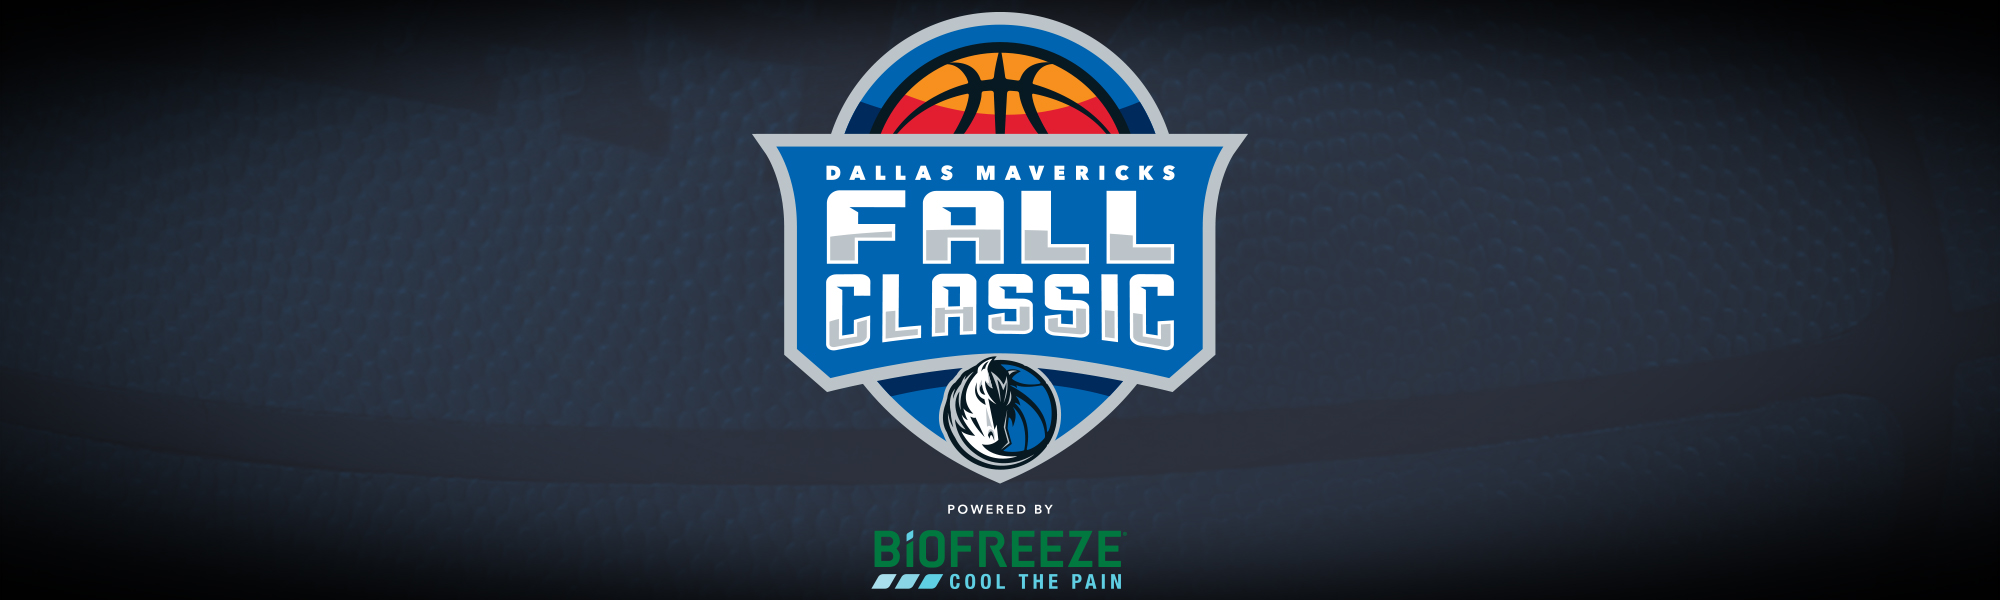 Fall Classic The Official Home of the Dallas Mavericks